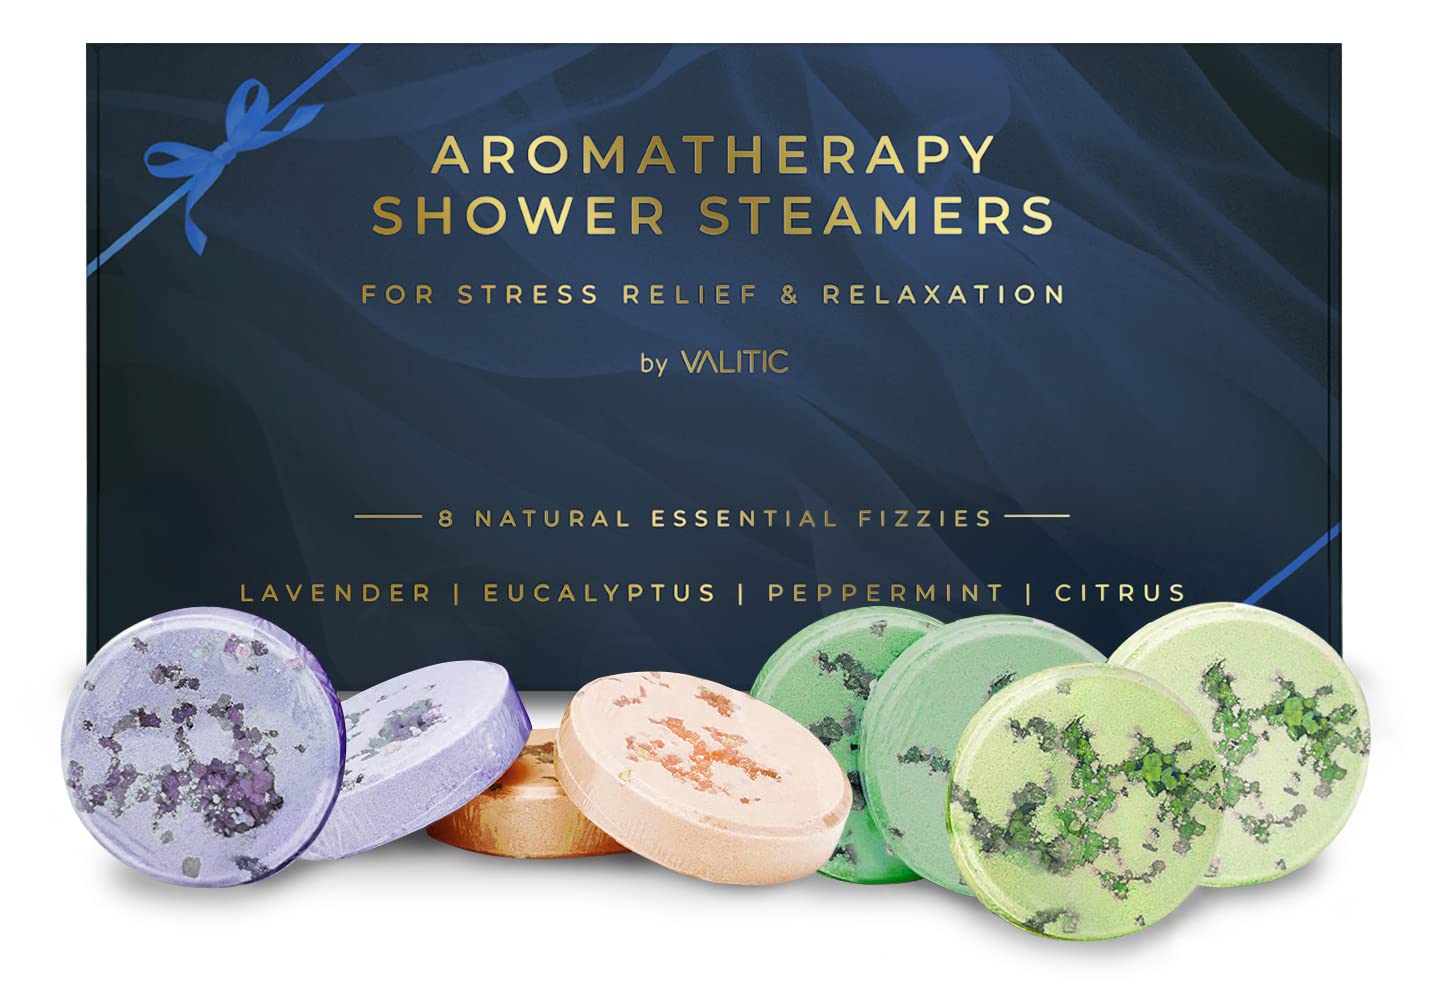 Valitic Aromatherapy Shower Steamers for Stress Relief and